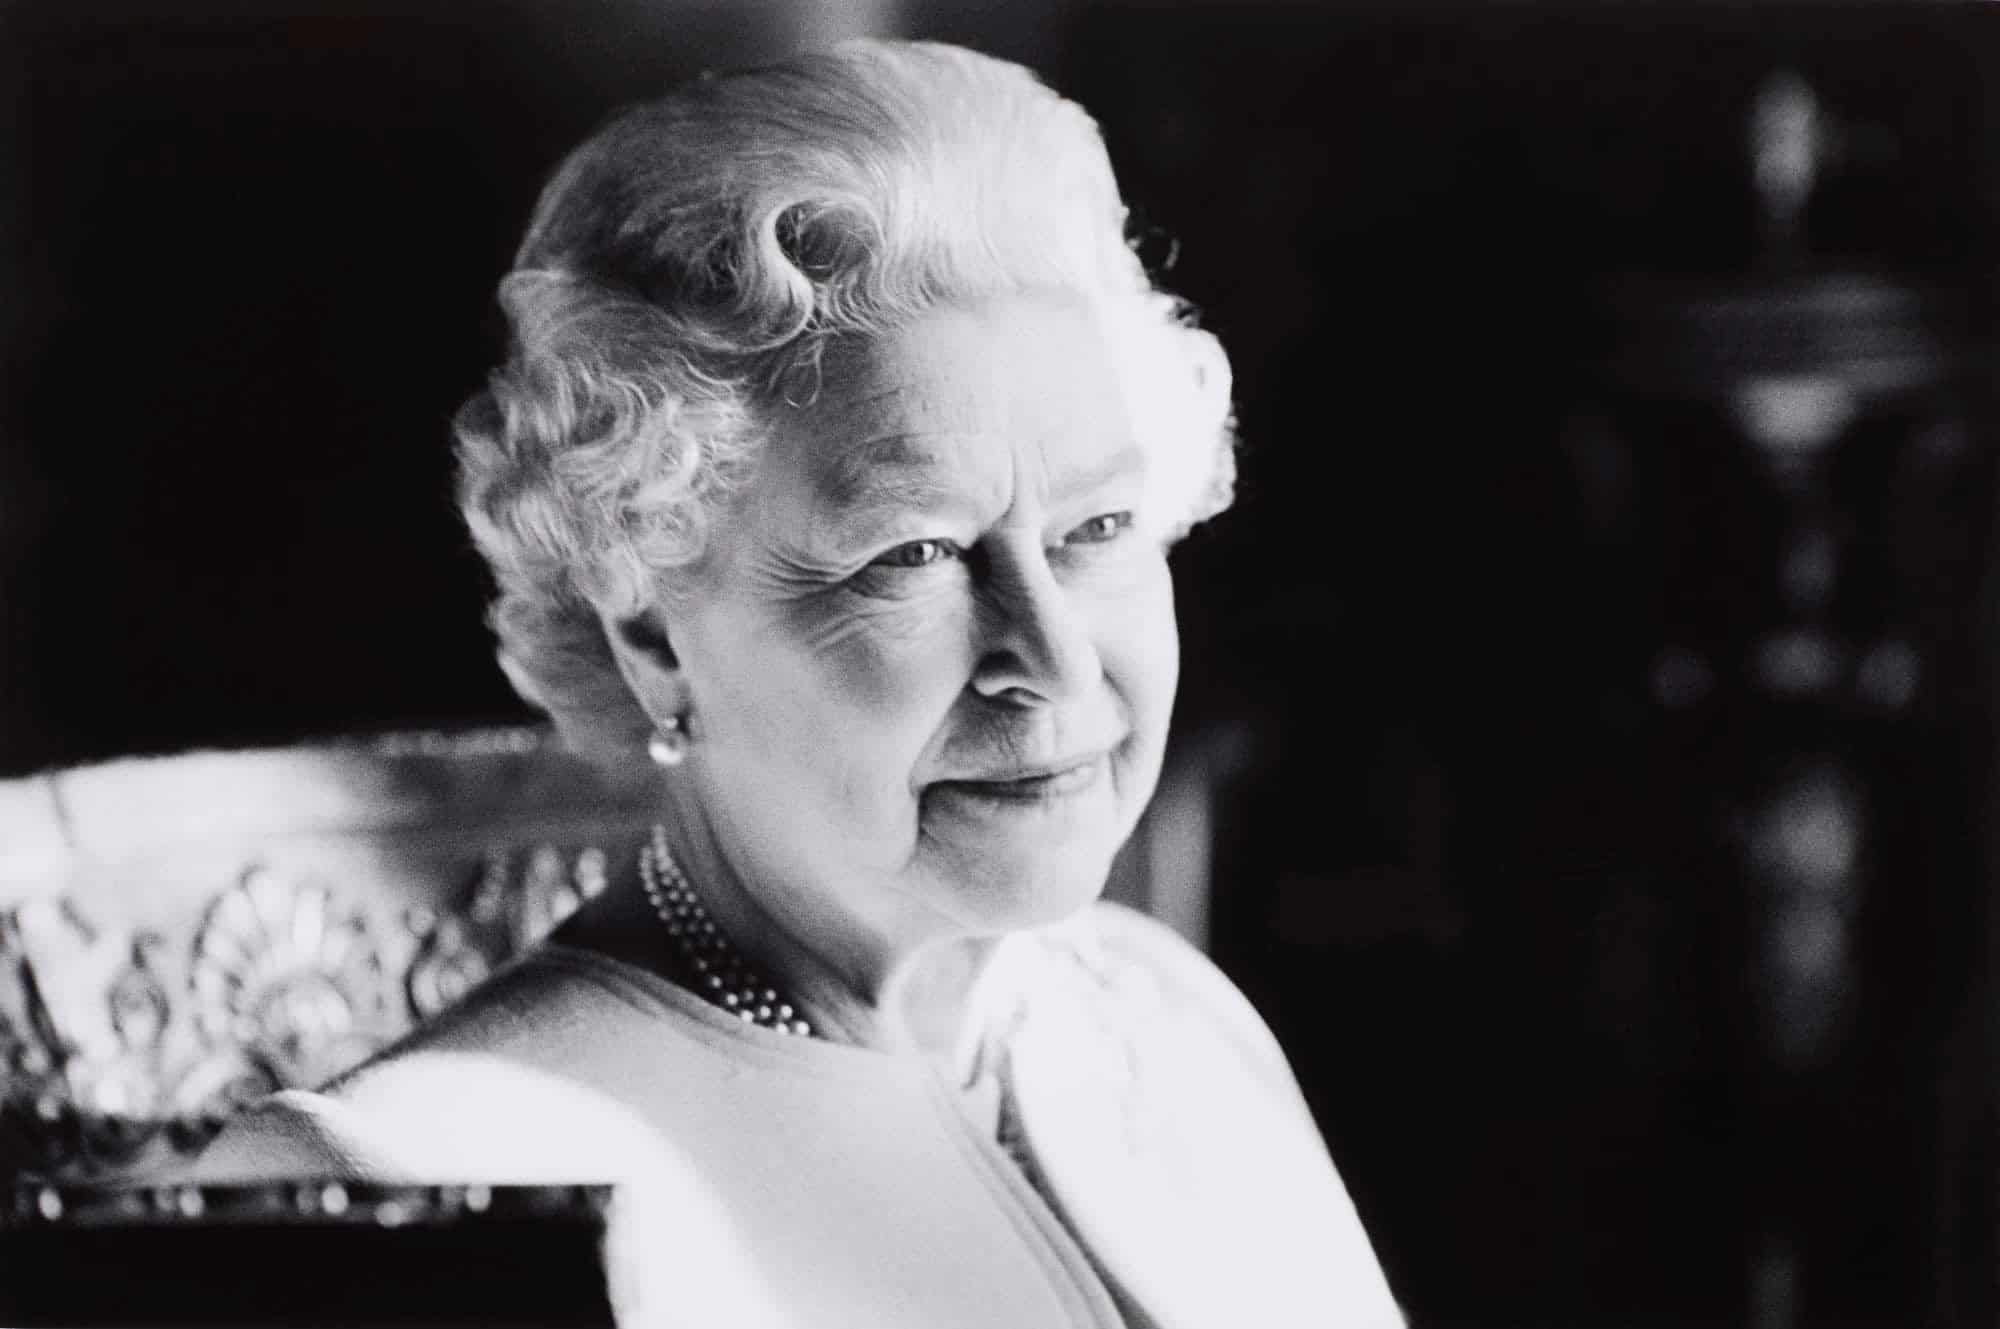 Black and white phot of The Queen.